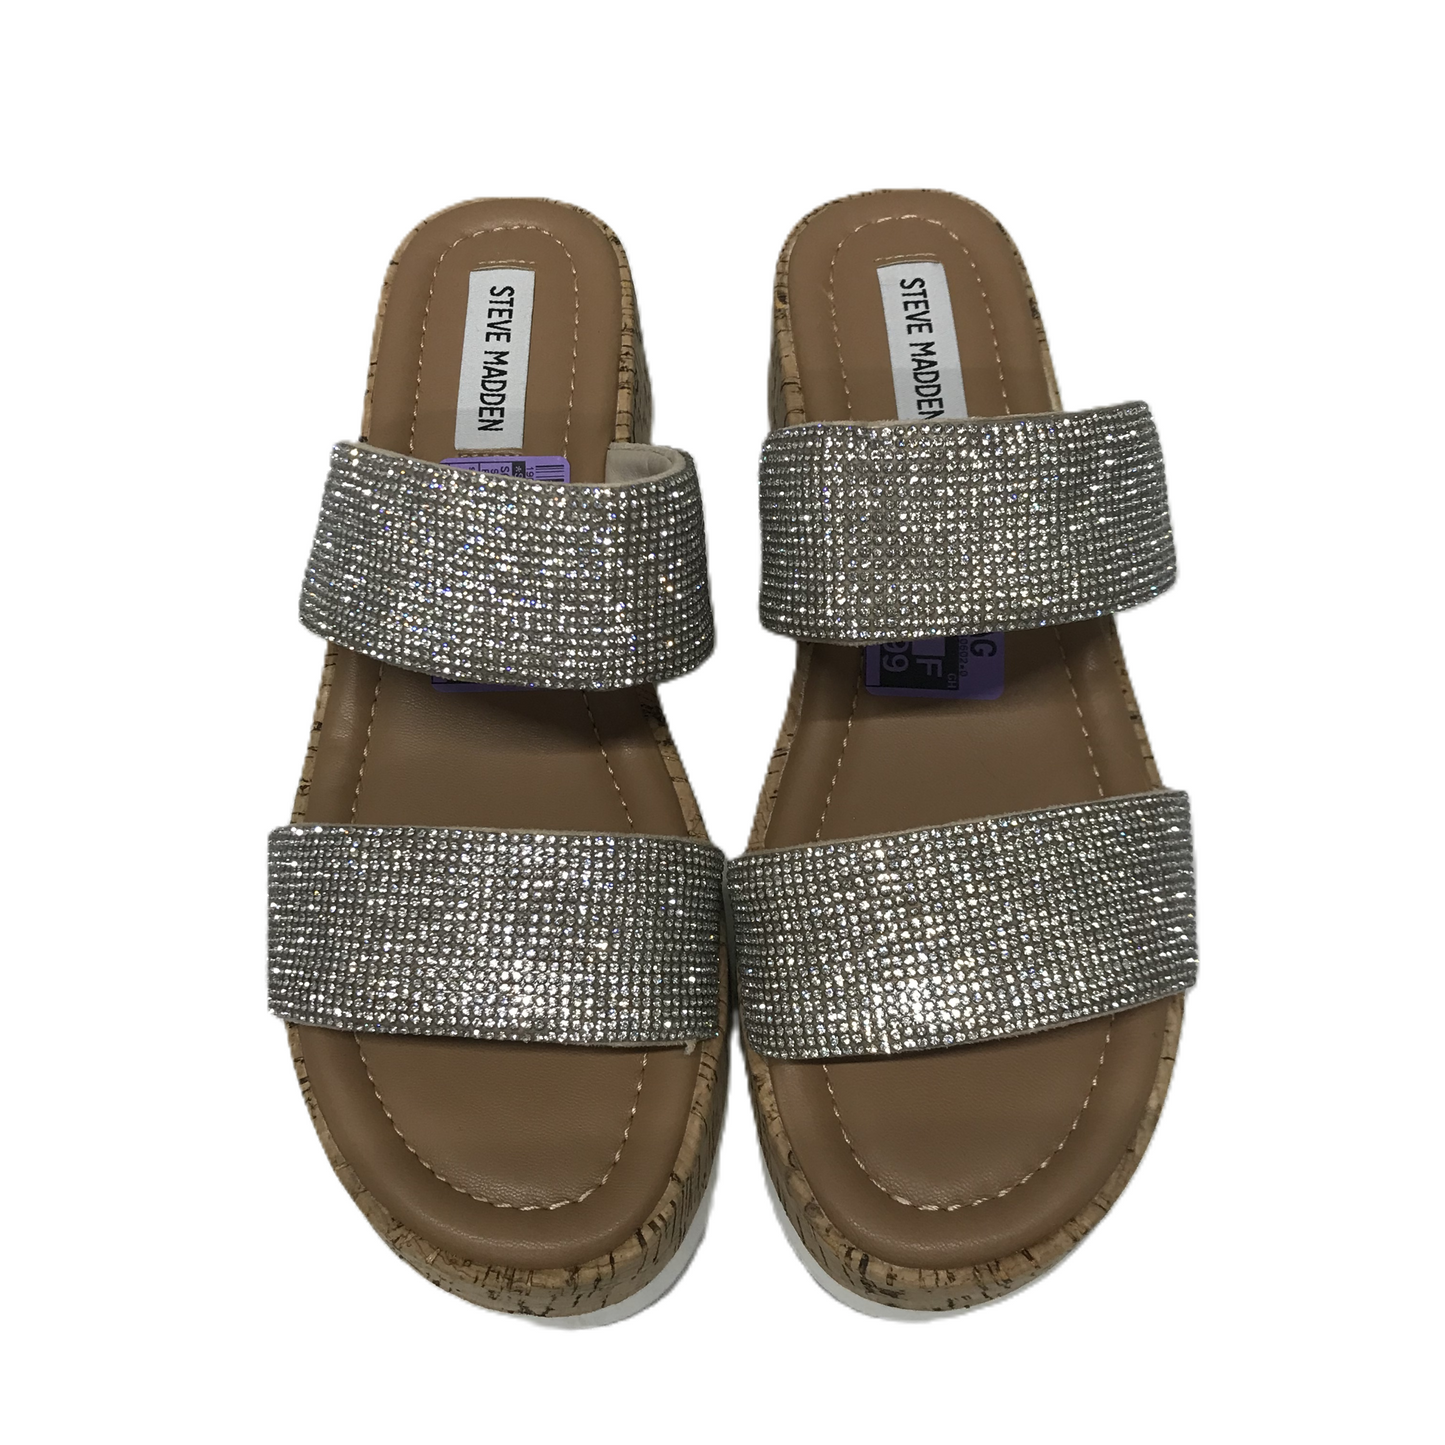 Silver Sandals Heels Wedge By Steve Madden, Size: 8.5